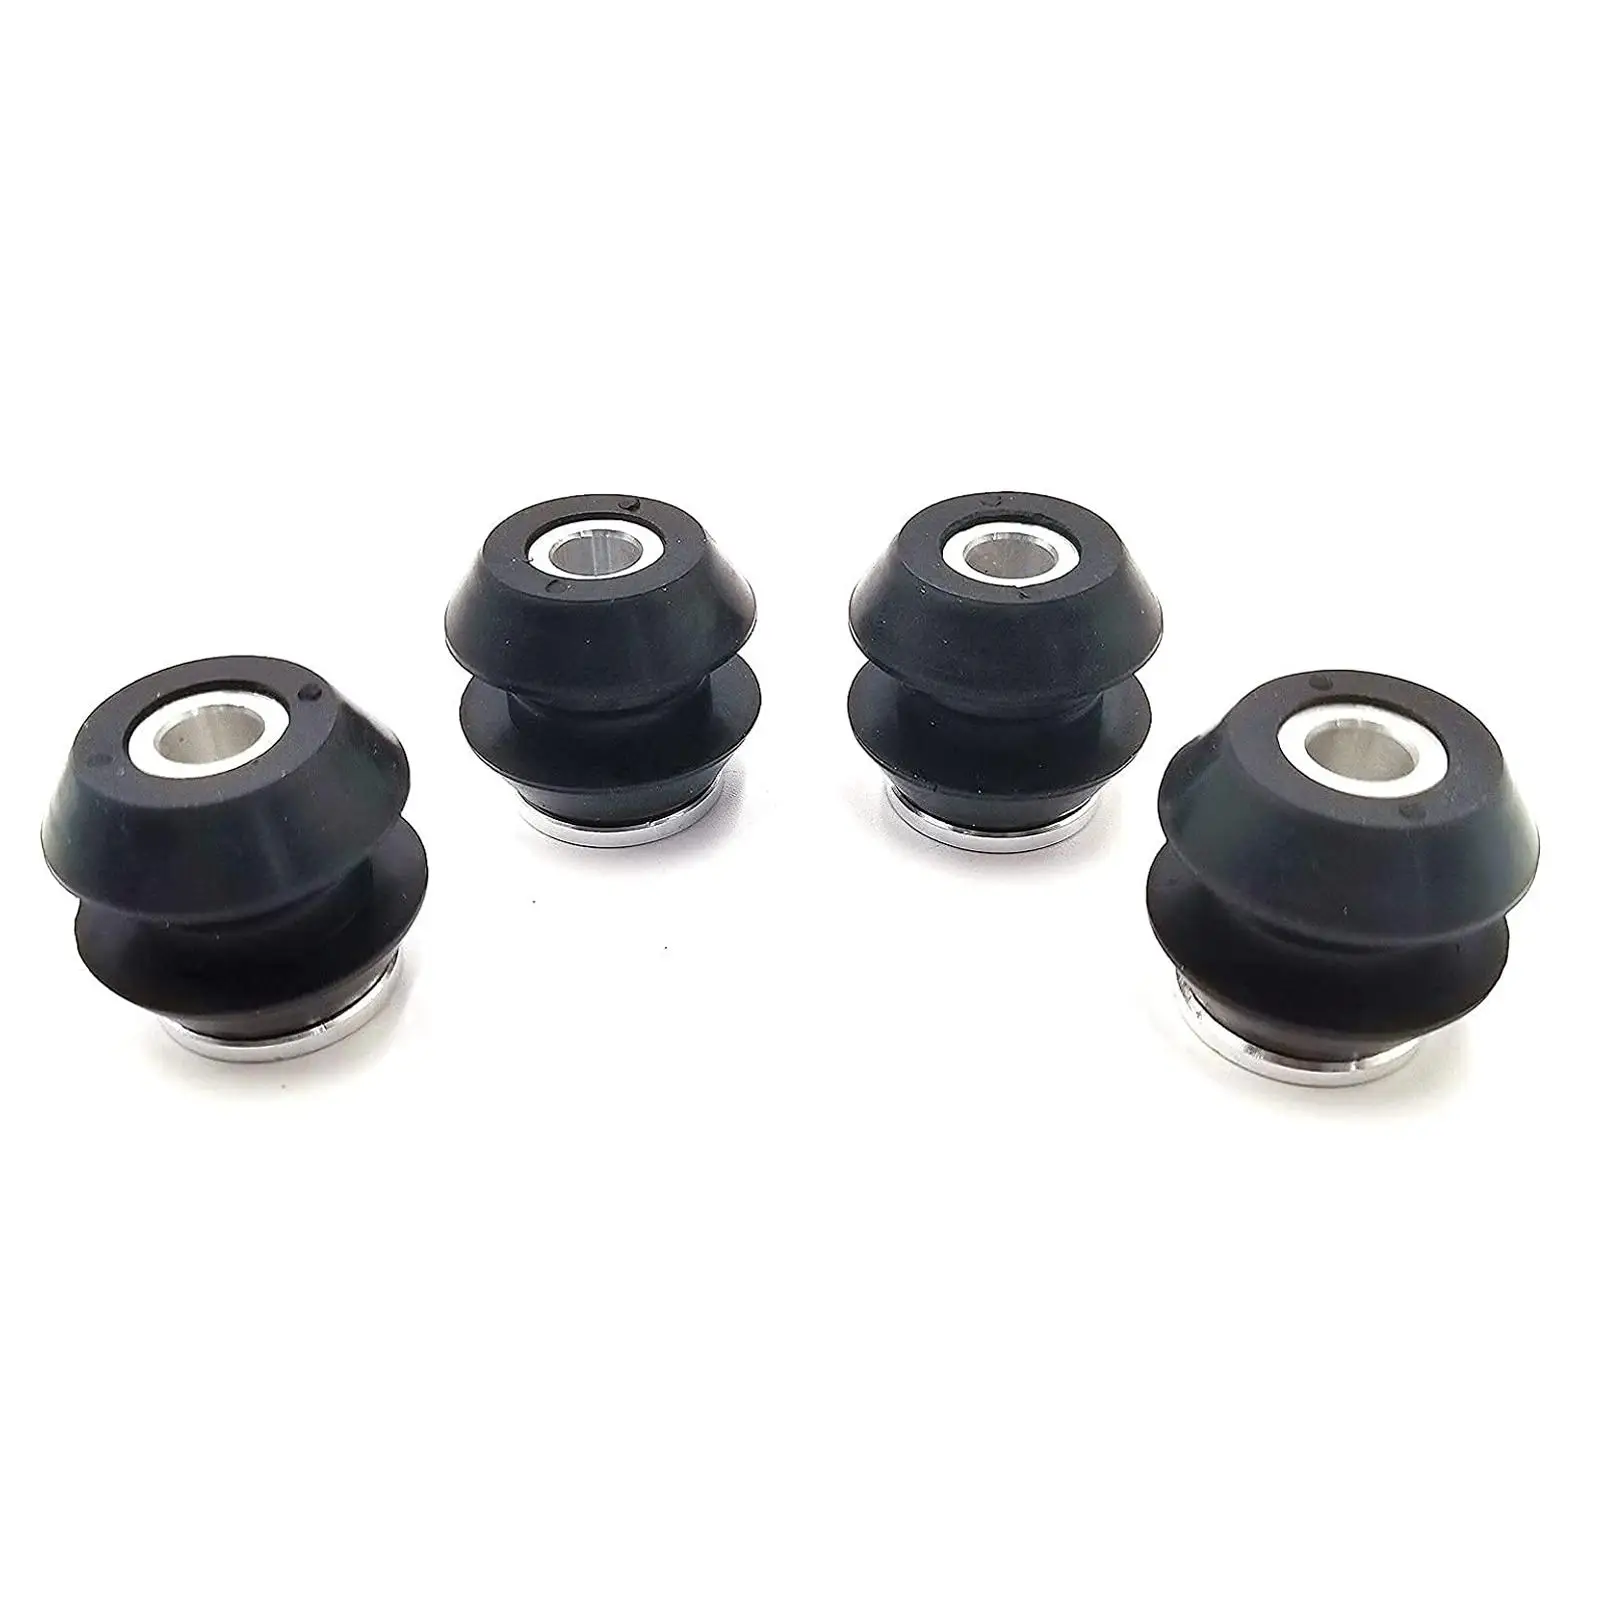 Ficm Mounting Bushing Set (Fuel Injection Control Module) VT275 VT365 for Ford 6.0L Accessories High Quality